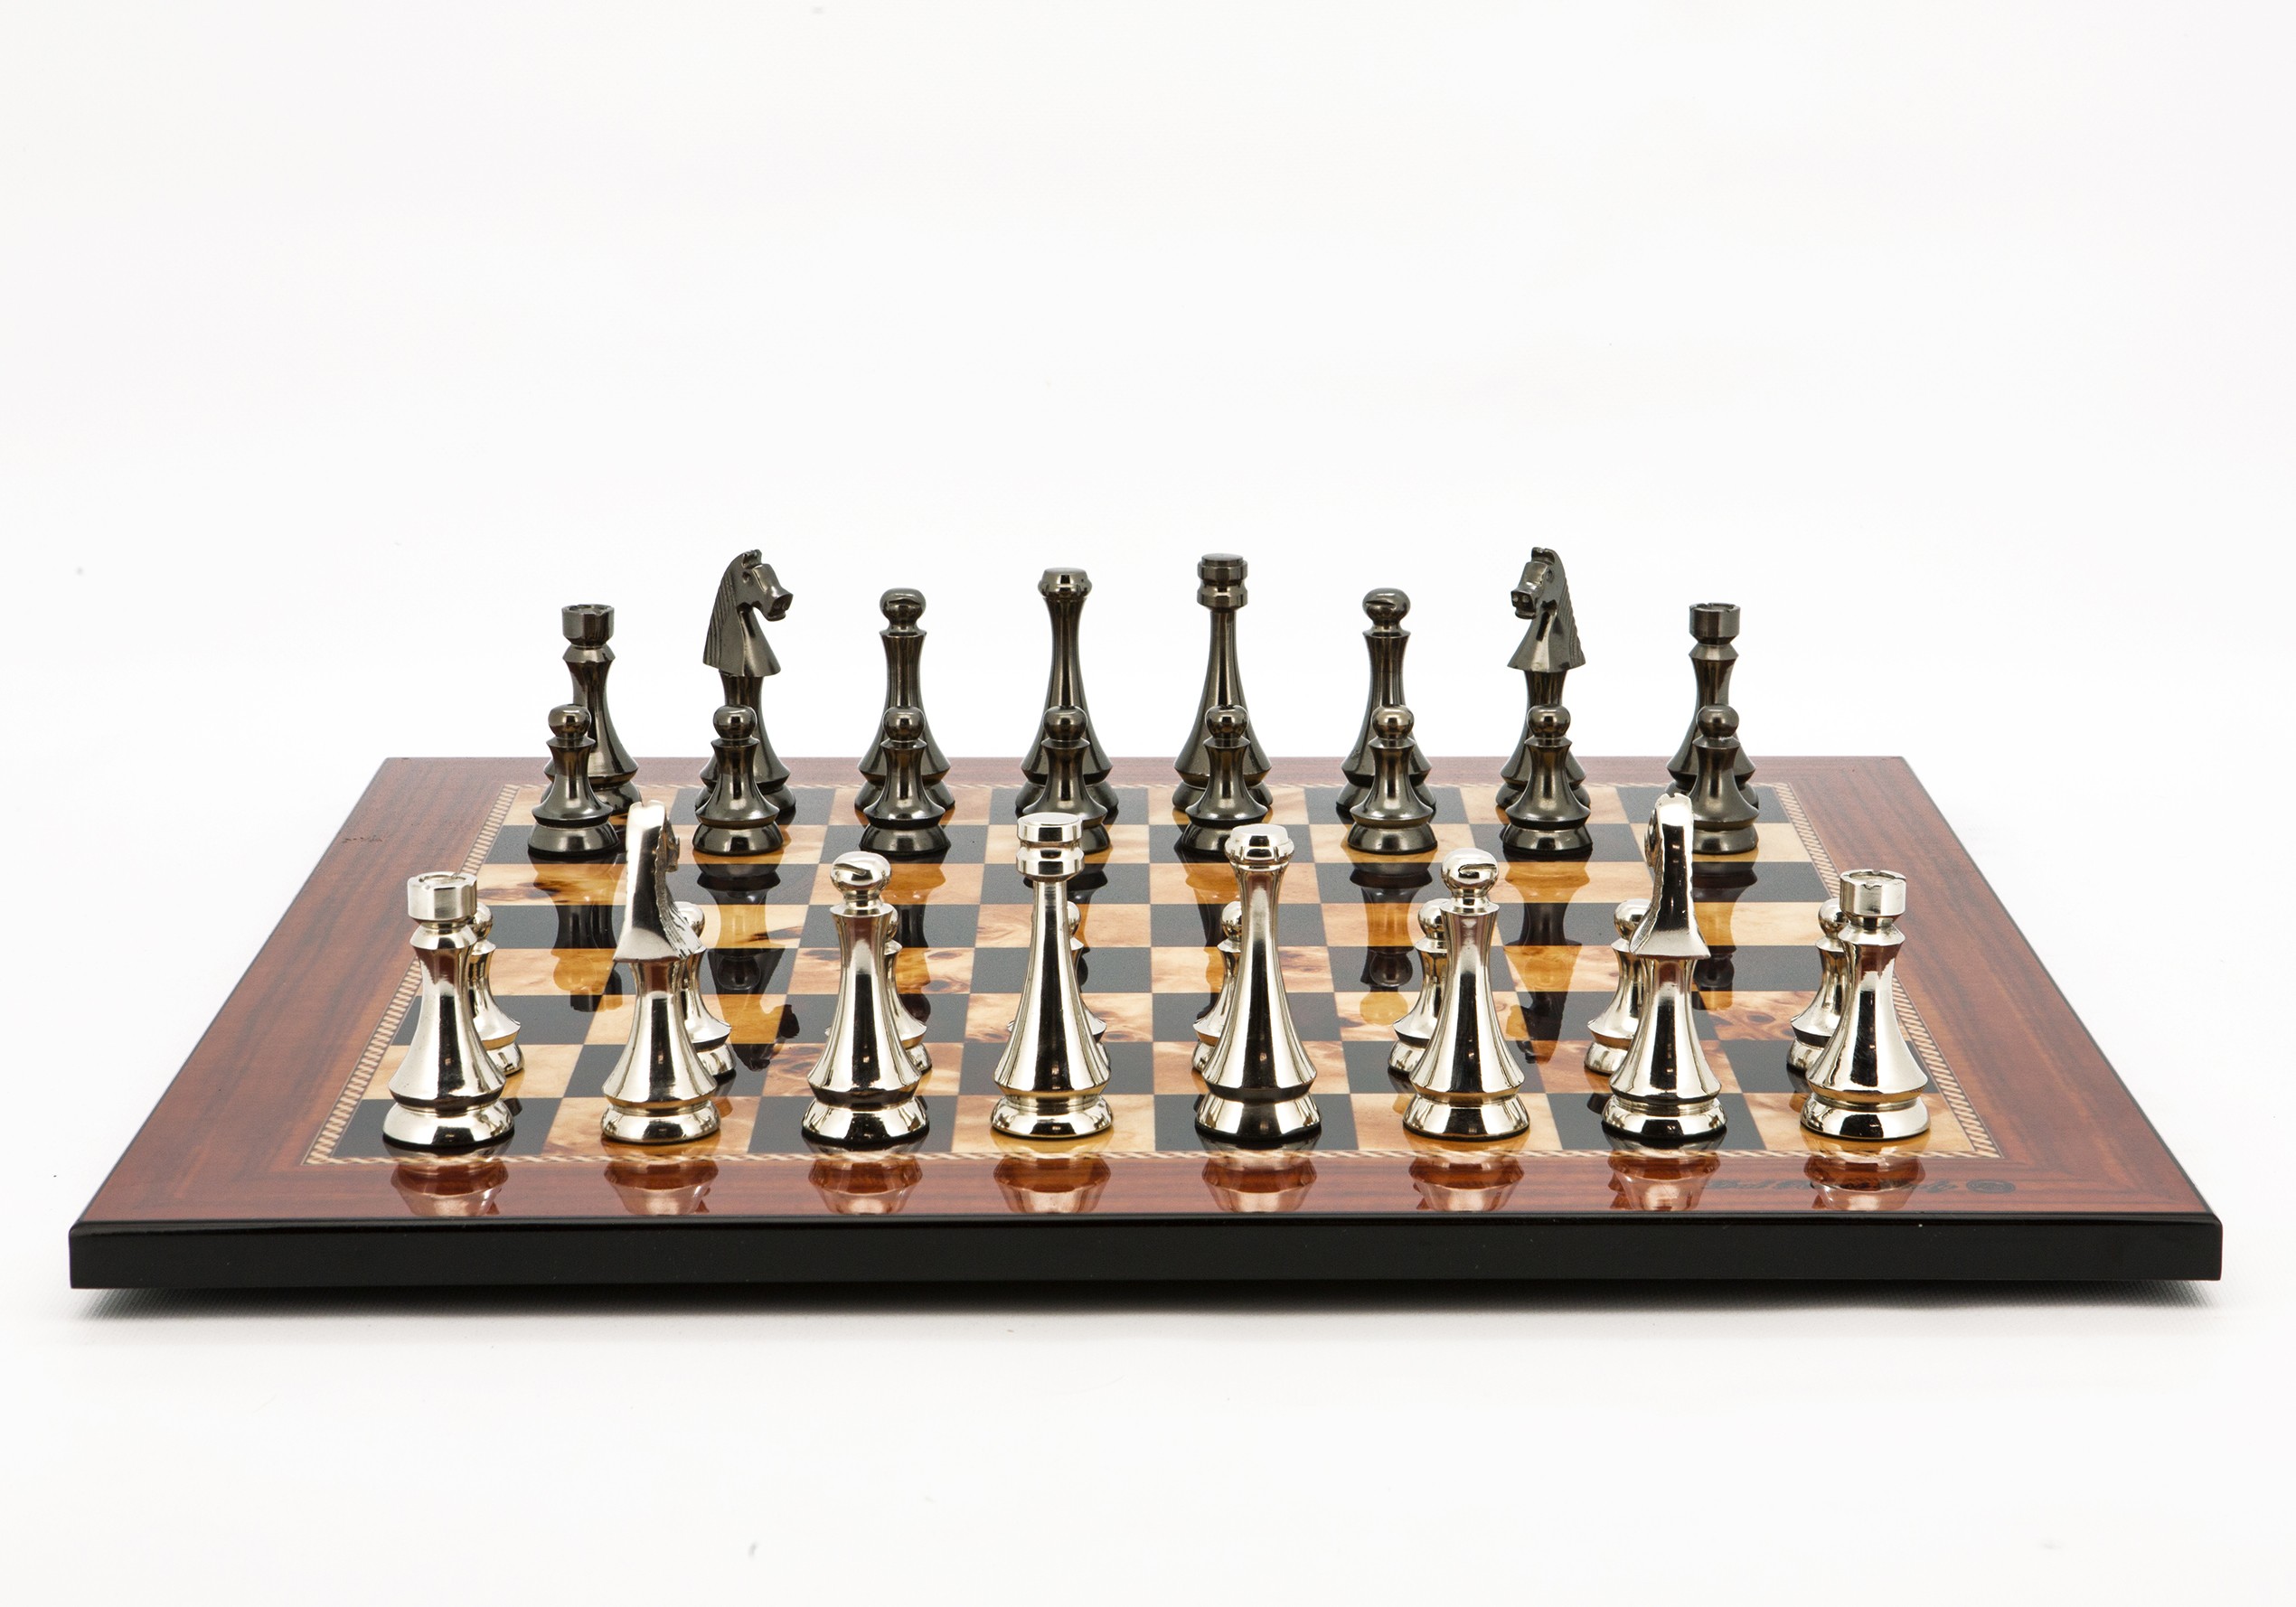 Dal Rossi Italy Chess Set Walnut Finish Flat Board 50cm, With Metal Dark Titanium and Silver chessmen 85mm